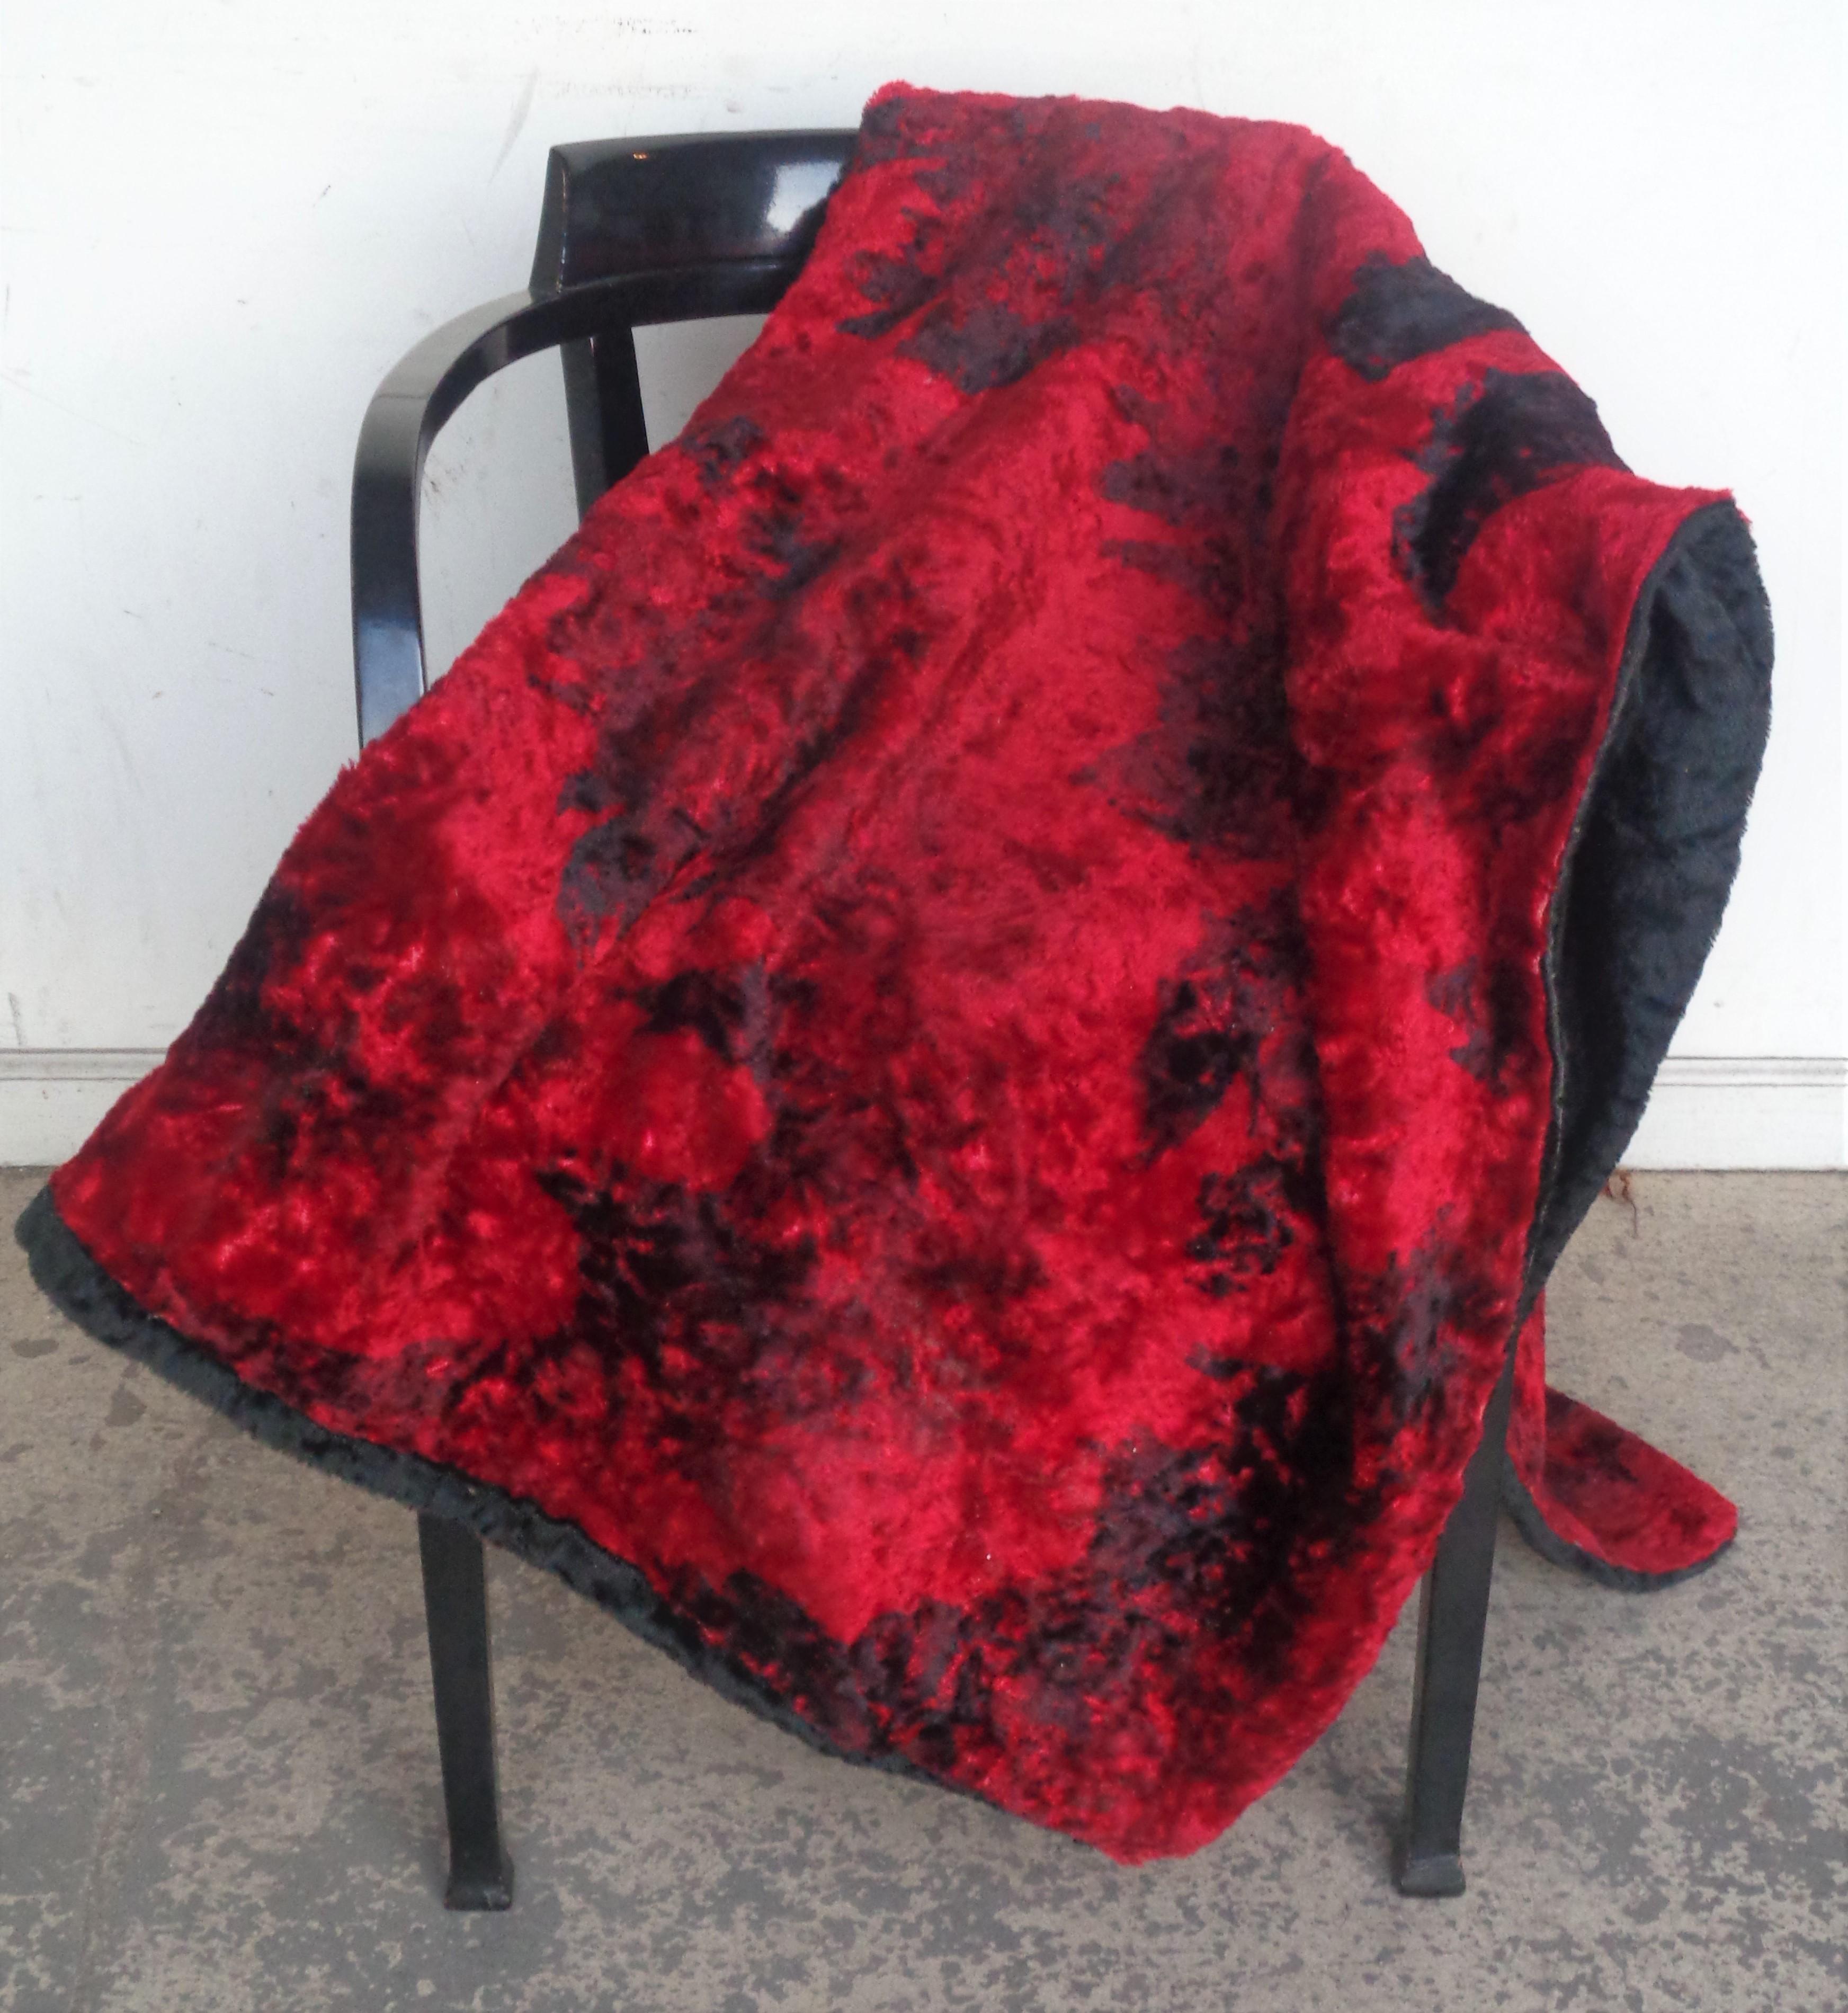 Unusual red and black abstract splotch design hand stitched mohair wool sofa chair furniture throw blanket. Reverse side is black. Soft thick textured lush supple wool with a beautiful sheen. Measures 64 inches by 48 inches and approximately 1 inch